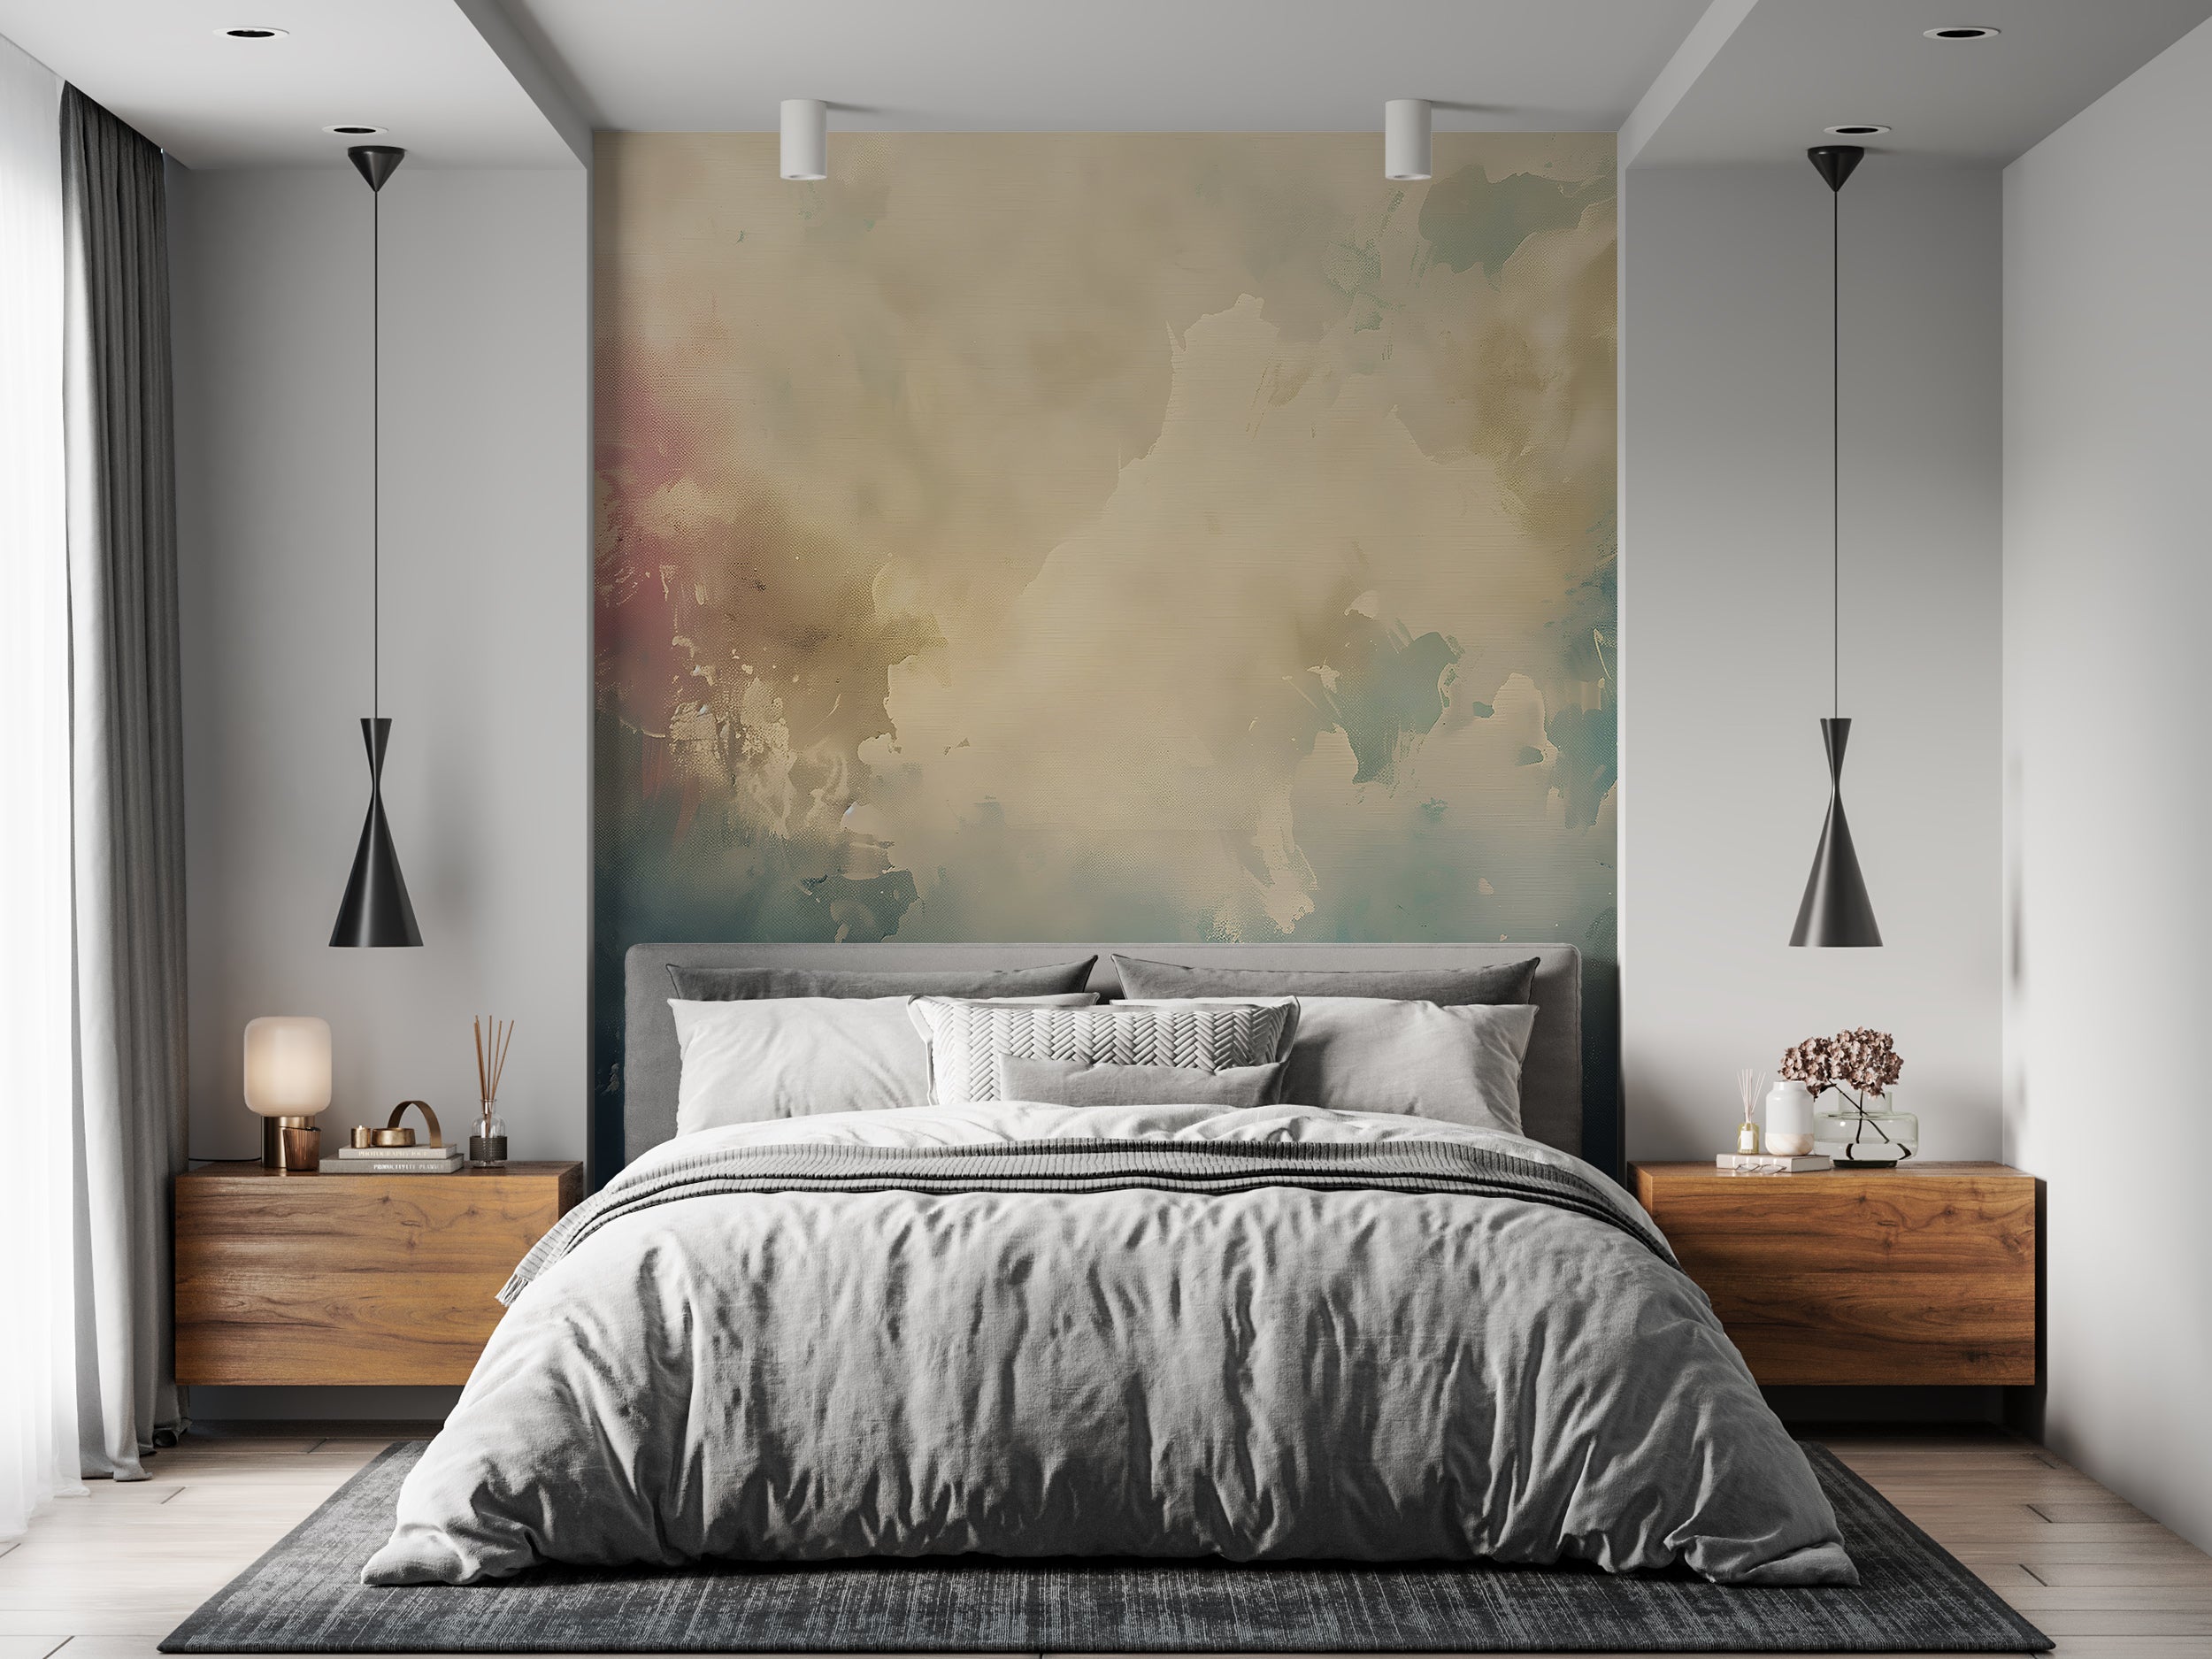 Abstract Art Wall Mural, Peel and Stick Plaster Design Wallpaper, Beige and Blue Abstract Accent Wall Decor, Watercolor Removable Art